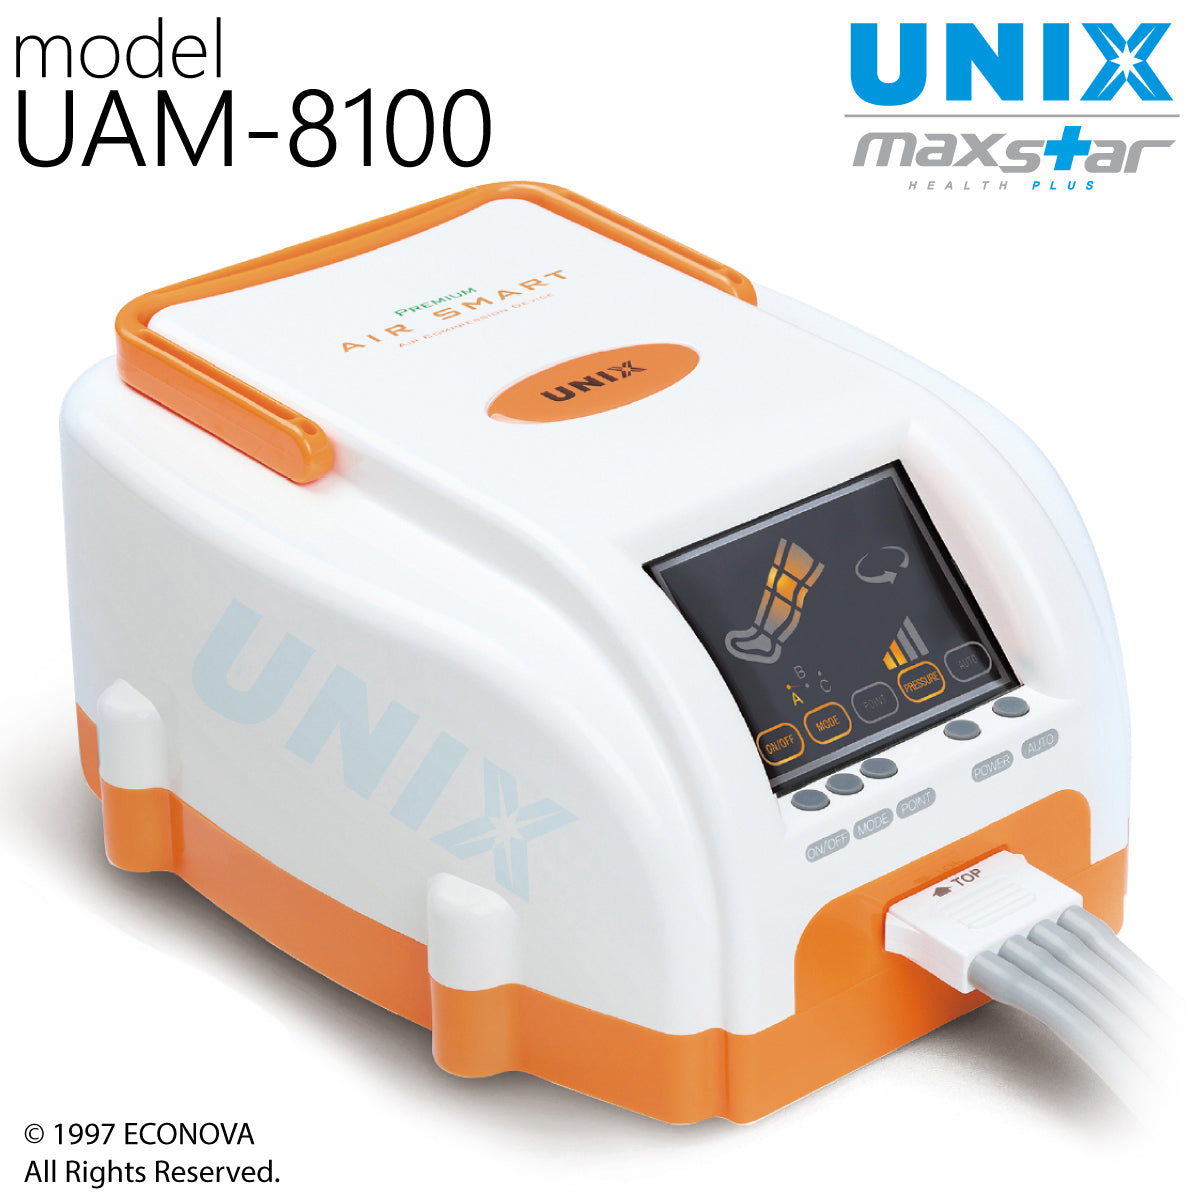 UNIX UAM-8100 Air Compression Therapy System Pneumatic Lymphedema 4 Ch